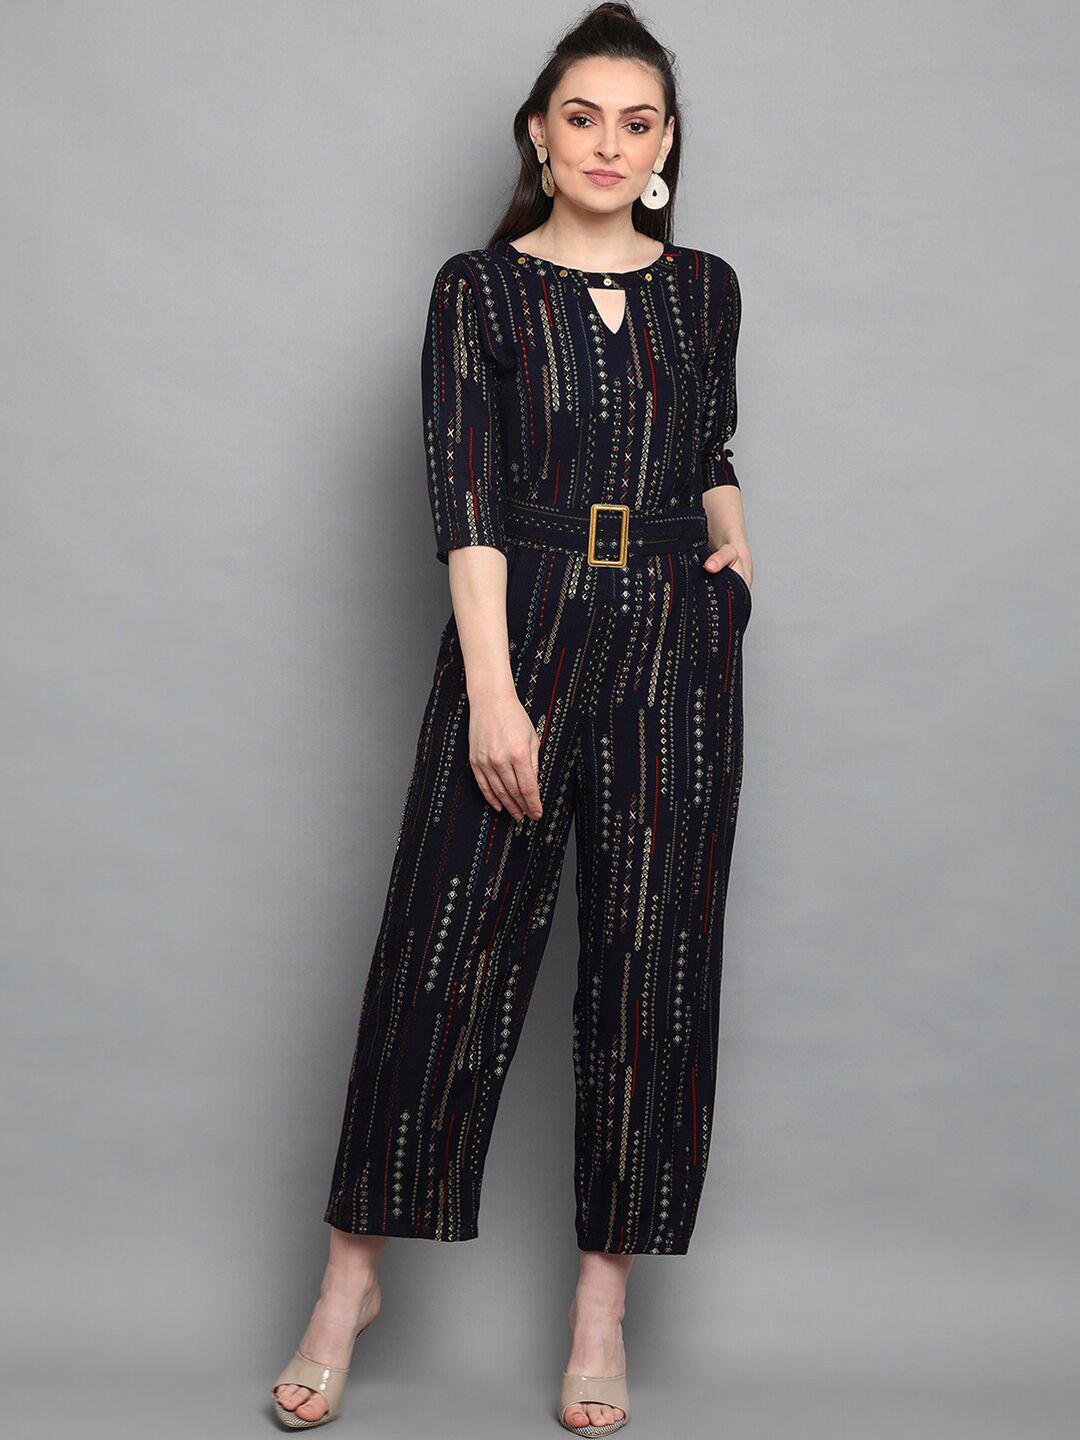 J Turritopsis Navy Blue & White Foil Printed Basic Jumpsuit Price in India